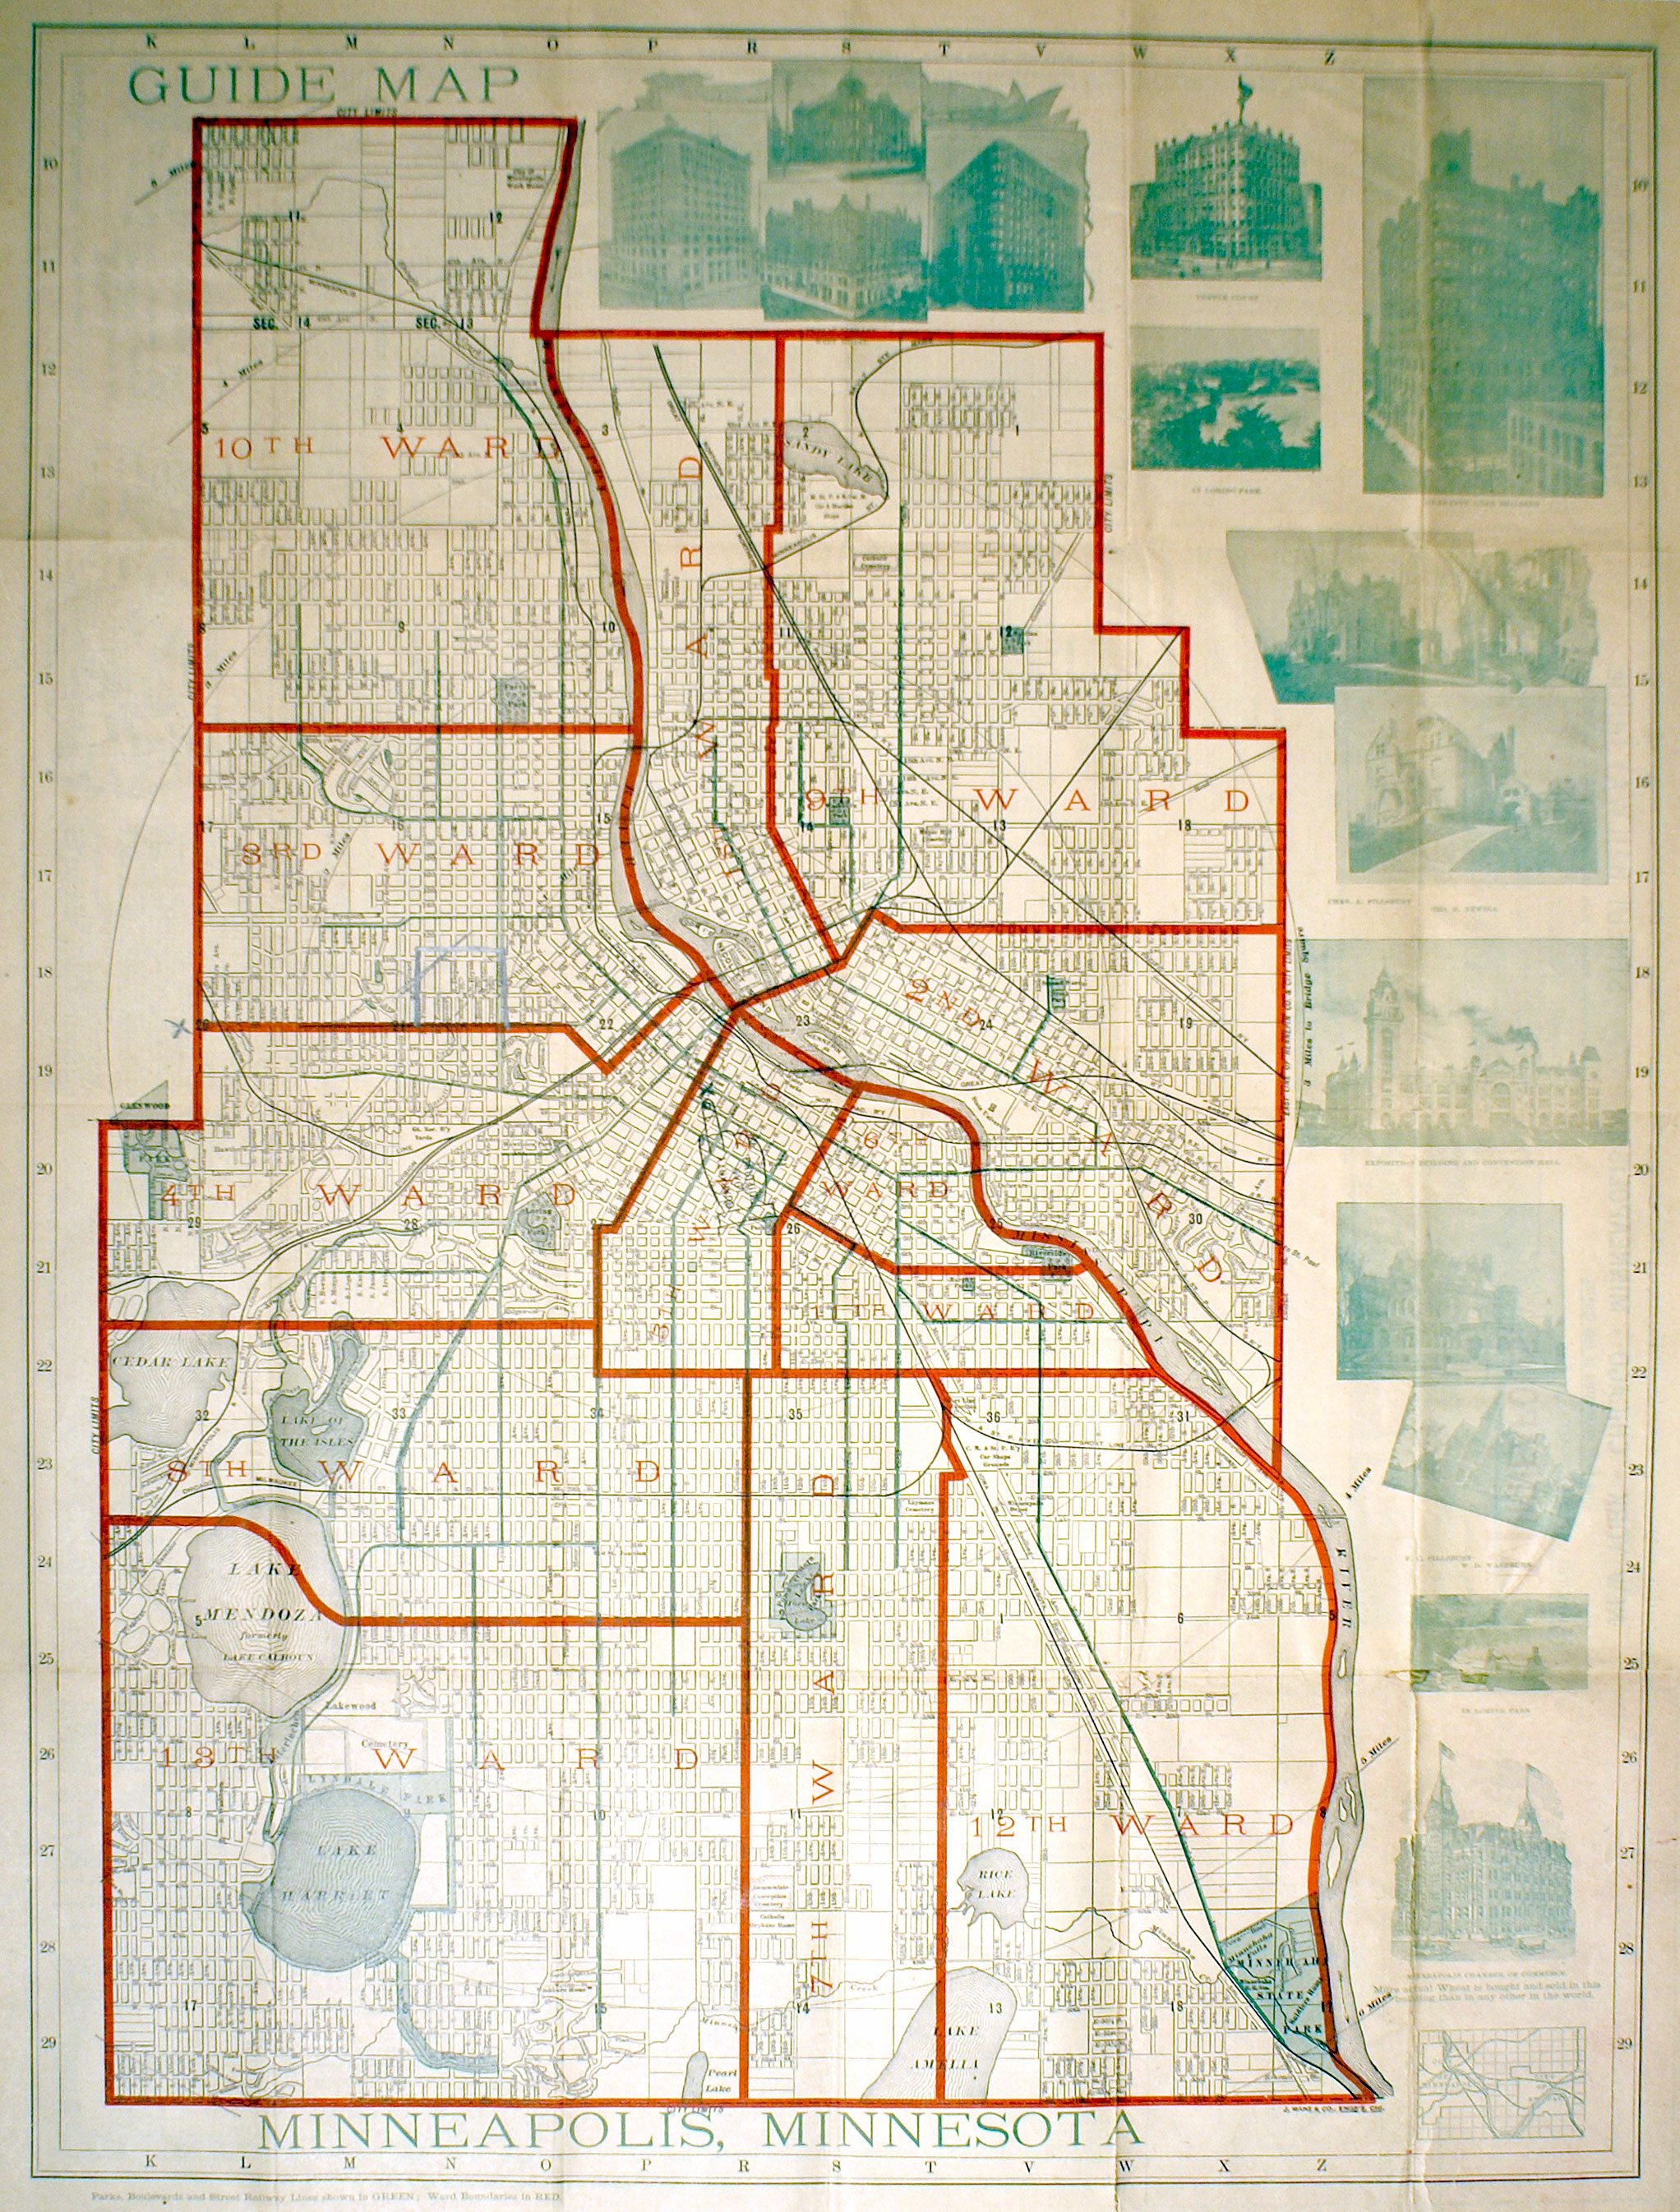 C18   91 Schematic - Guide Map Minneapolis C 1891 Separately Issued M  Antique M Cripts Maps Prints And Antiquities - C1891 Schematic